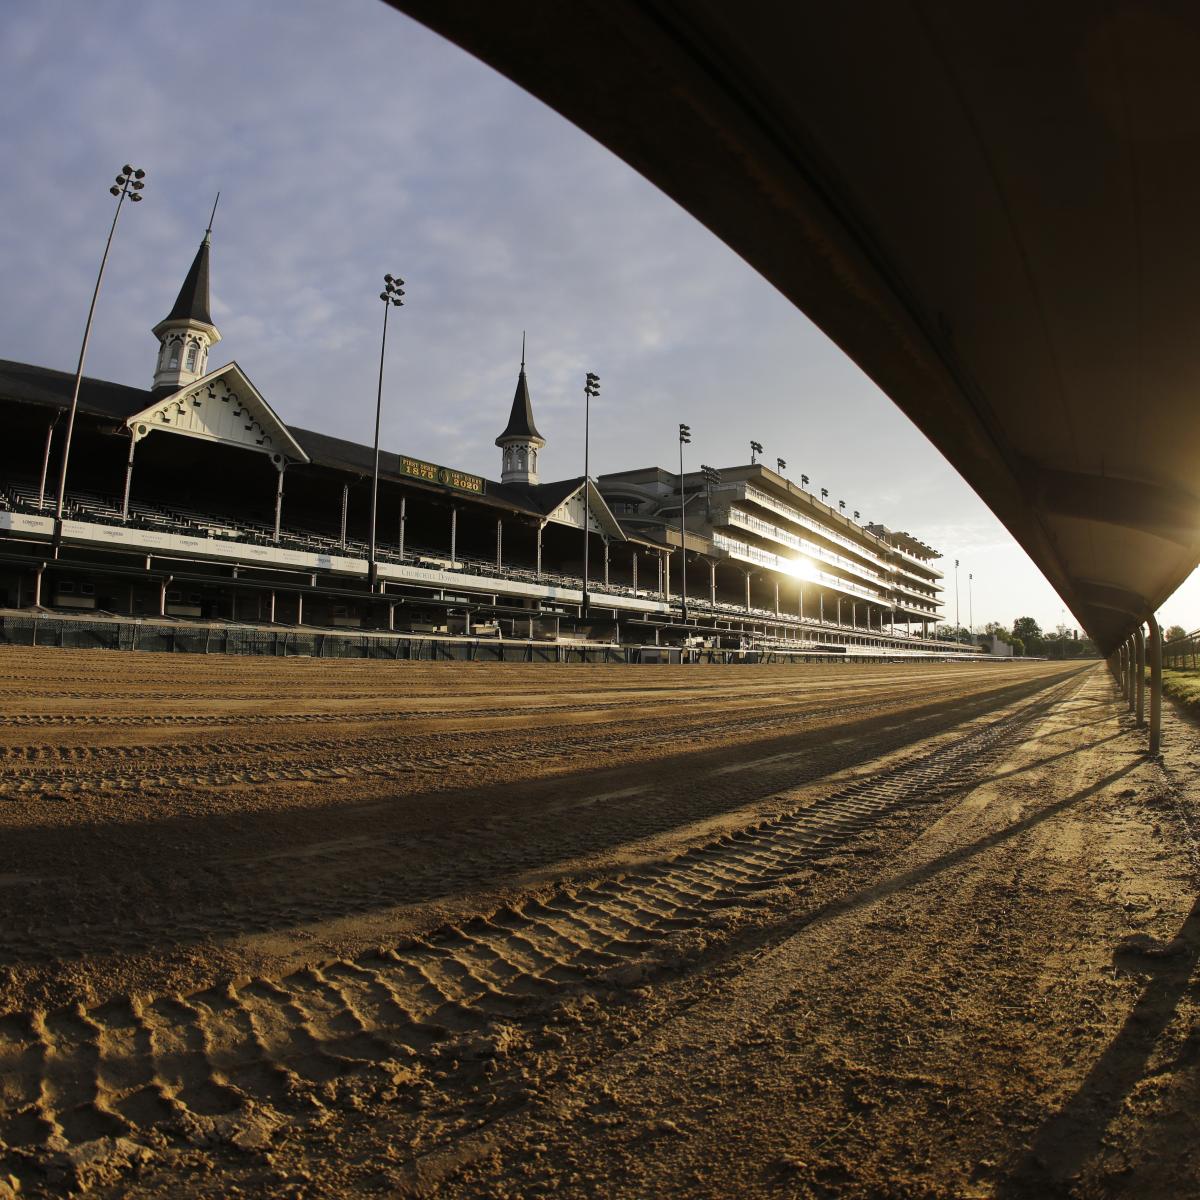 Kentucky Derby 2020 Post Time: Start Time, Schedule and More for 146th